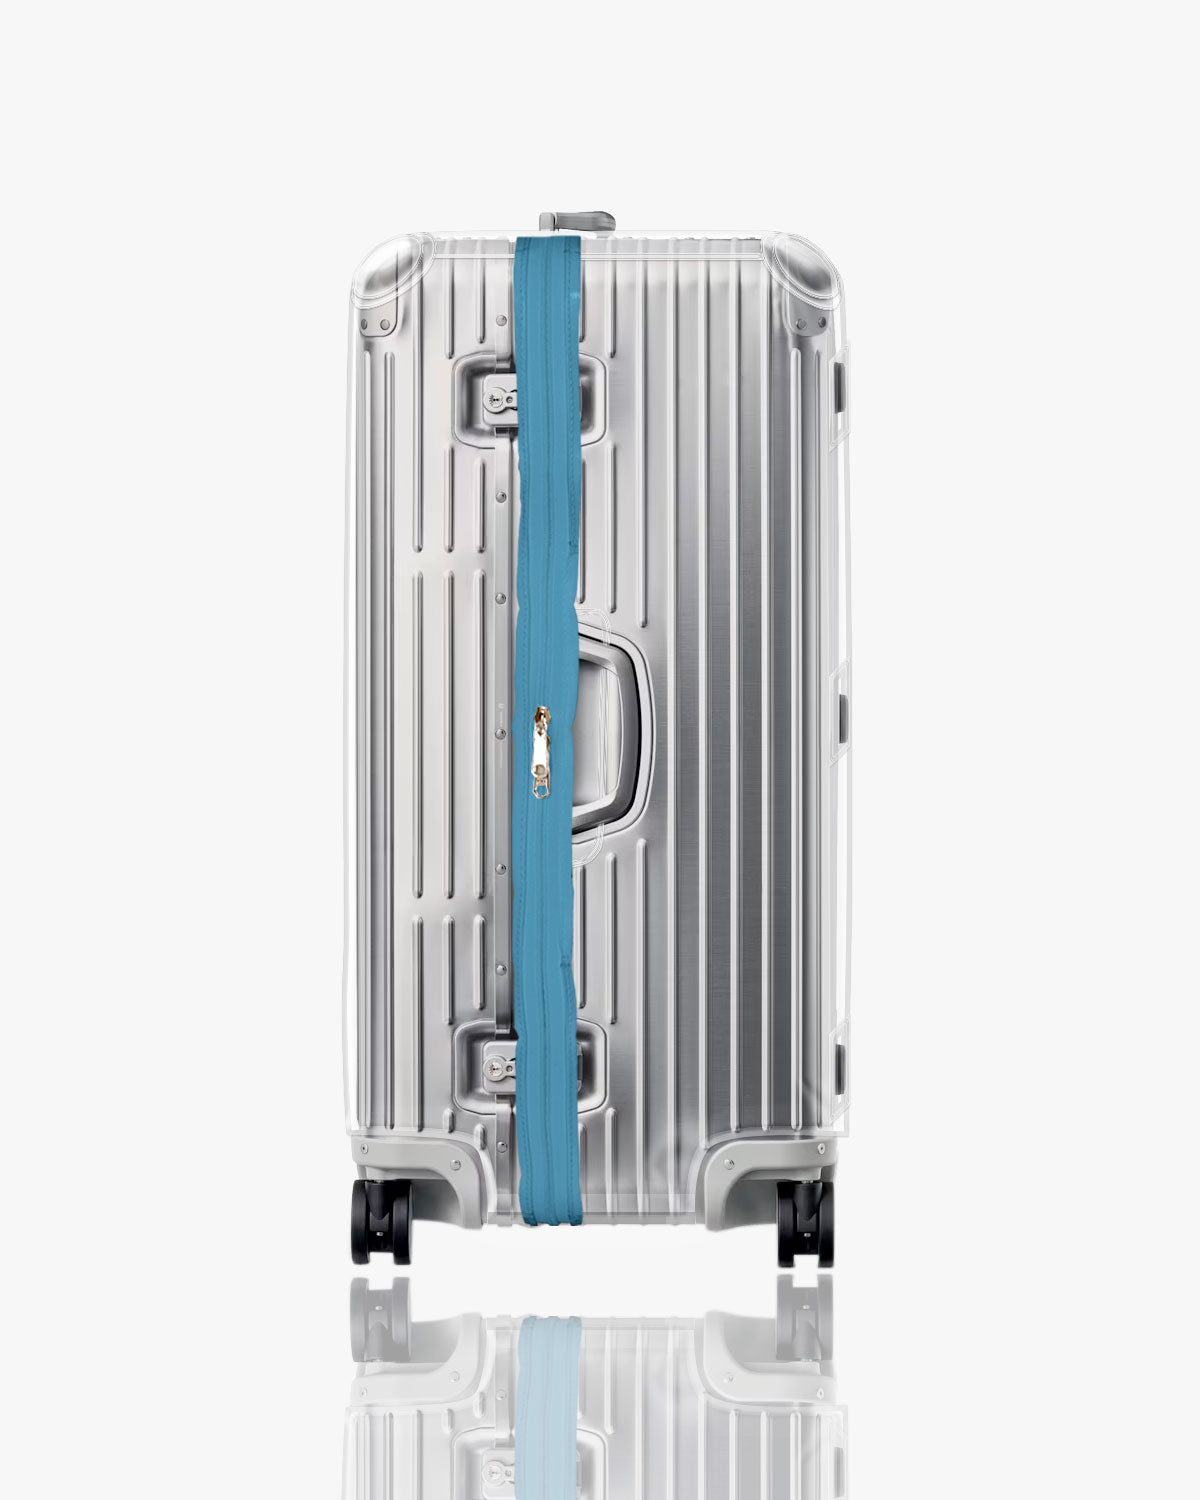 925 ORIGINAL - Clear Protective Luggage Cover